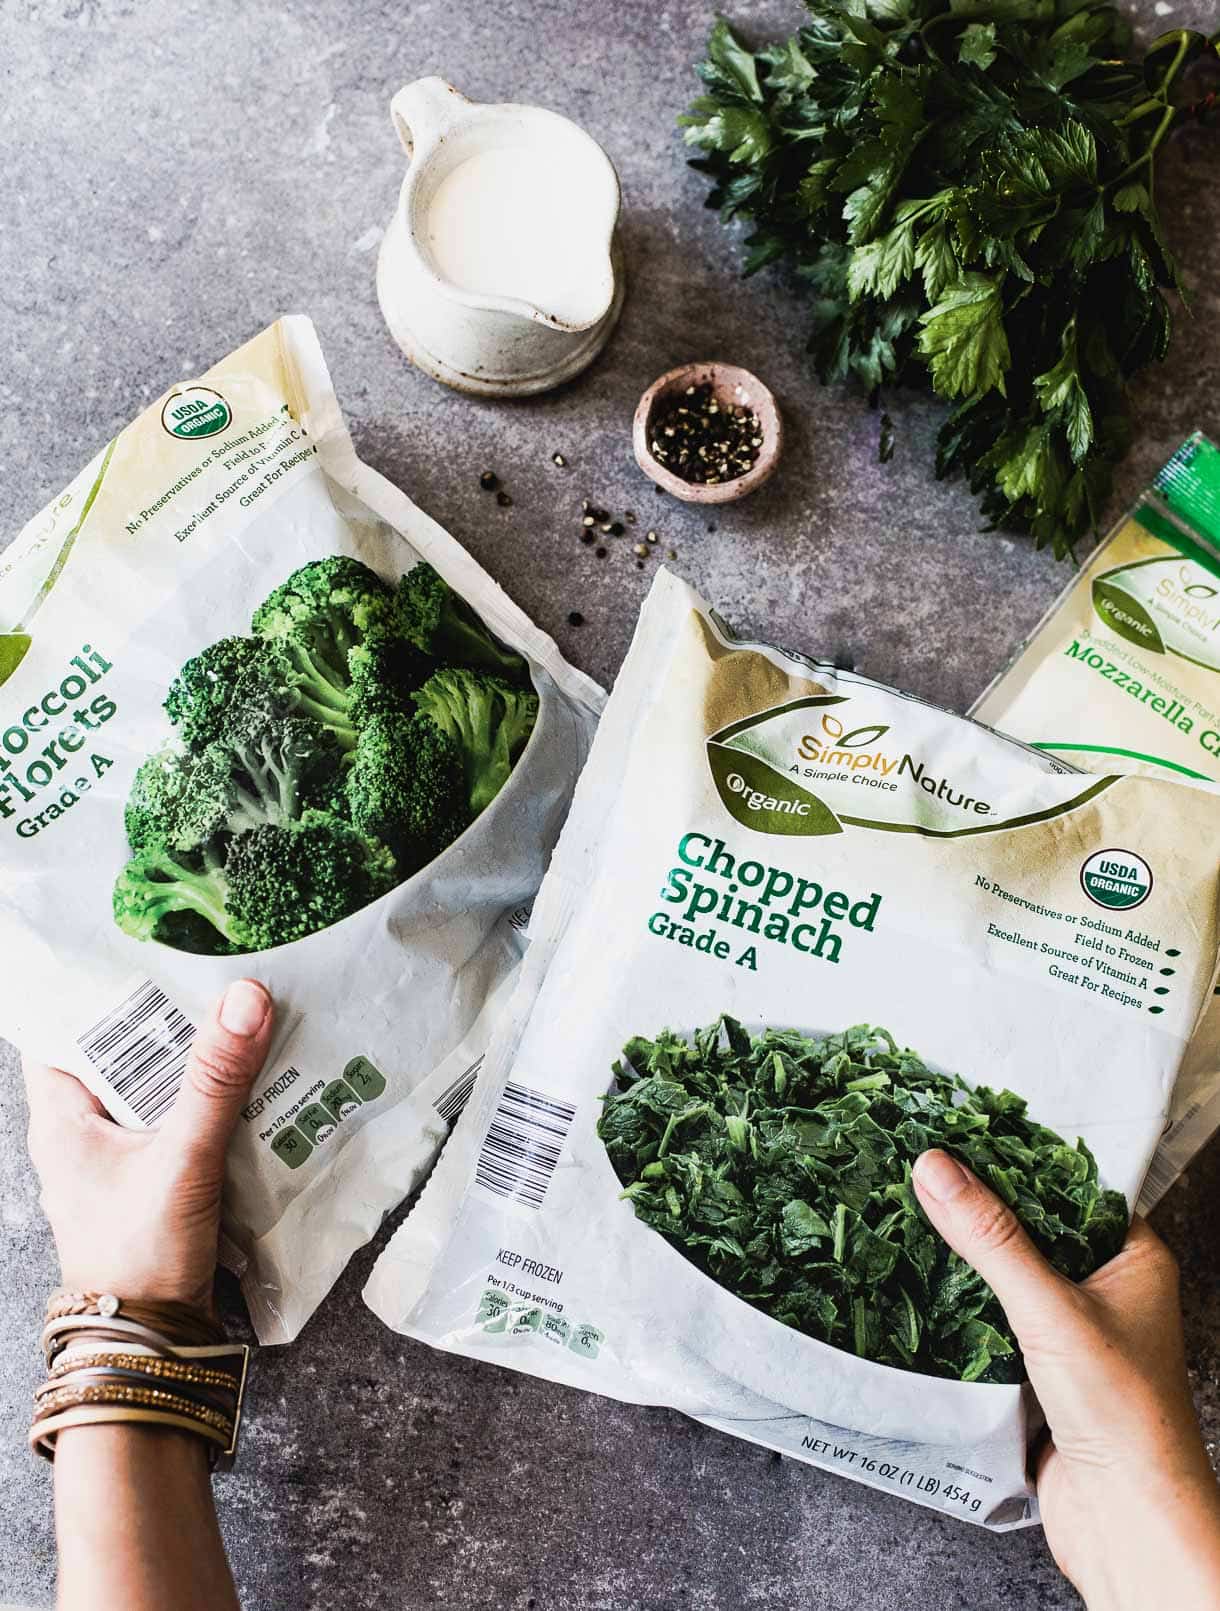 bags of aldi frozen organic broccoli and chopped spinach